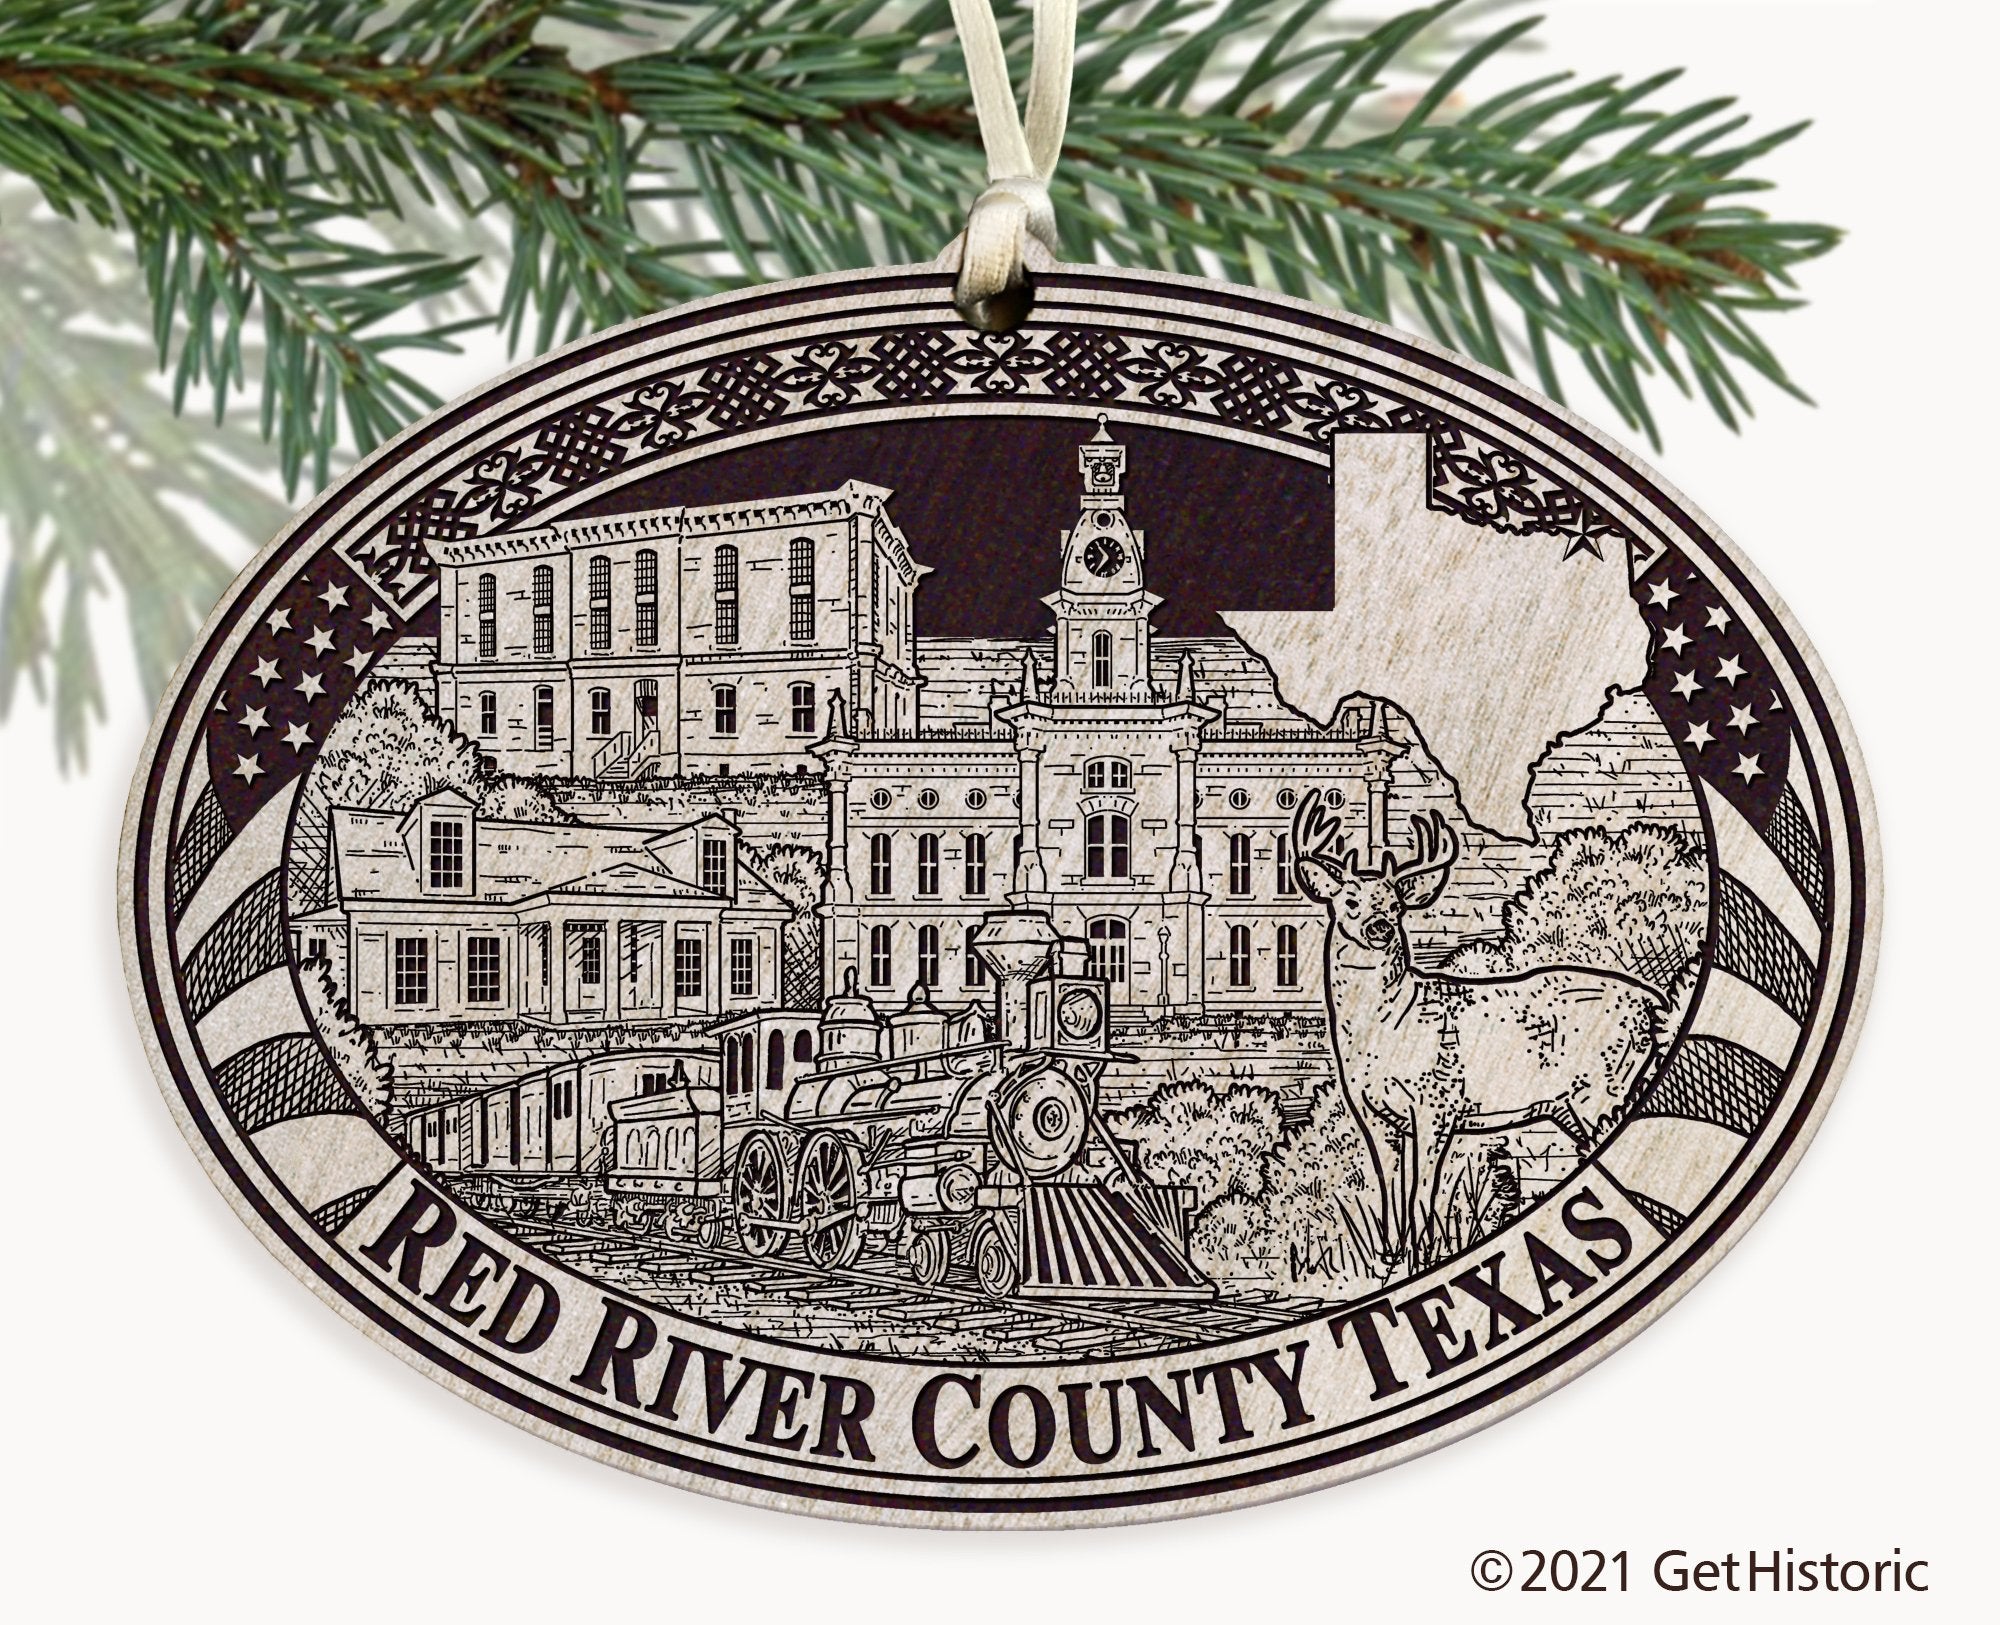 Red River County Texas Engraved Ornament